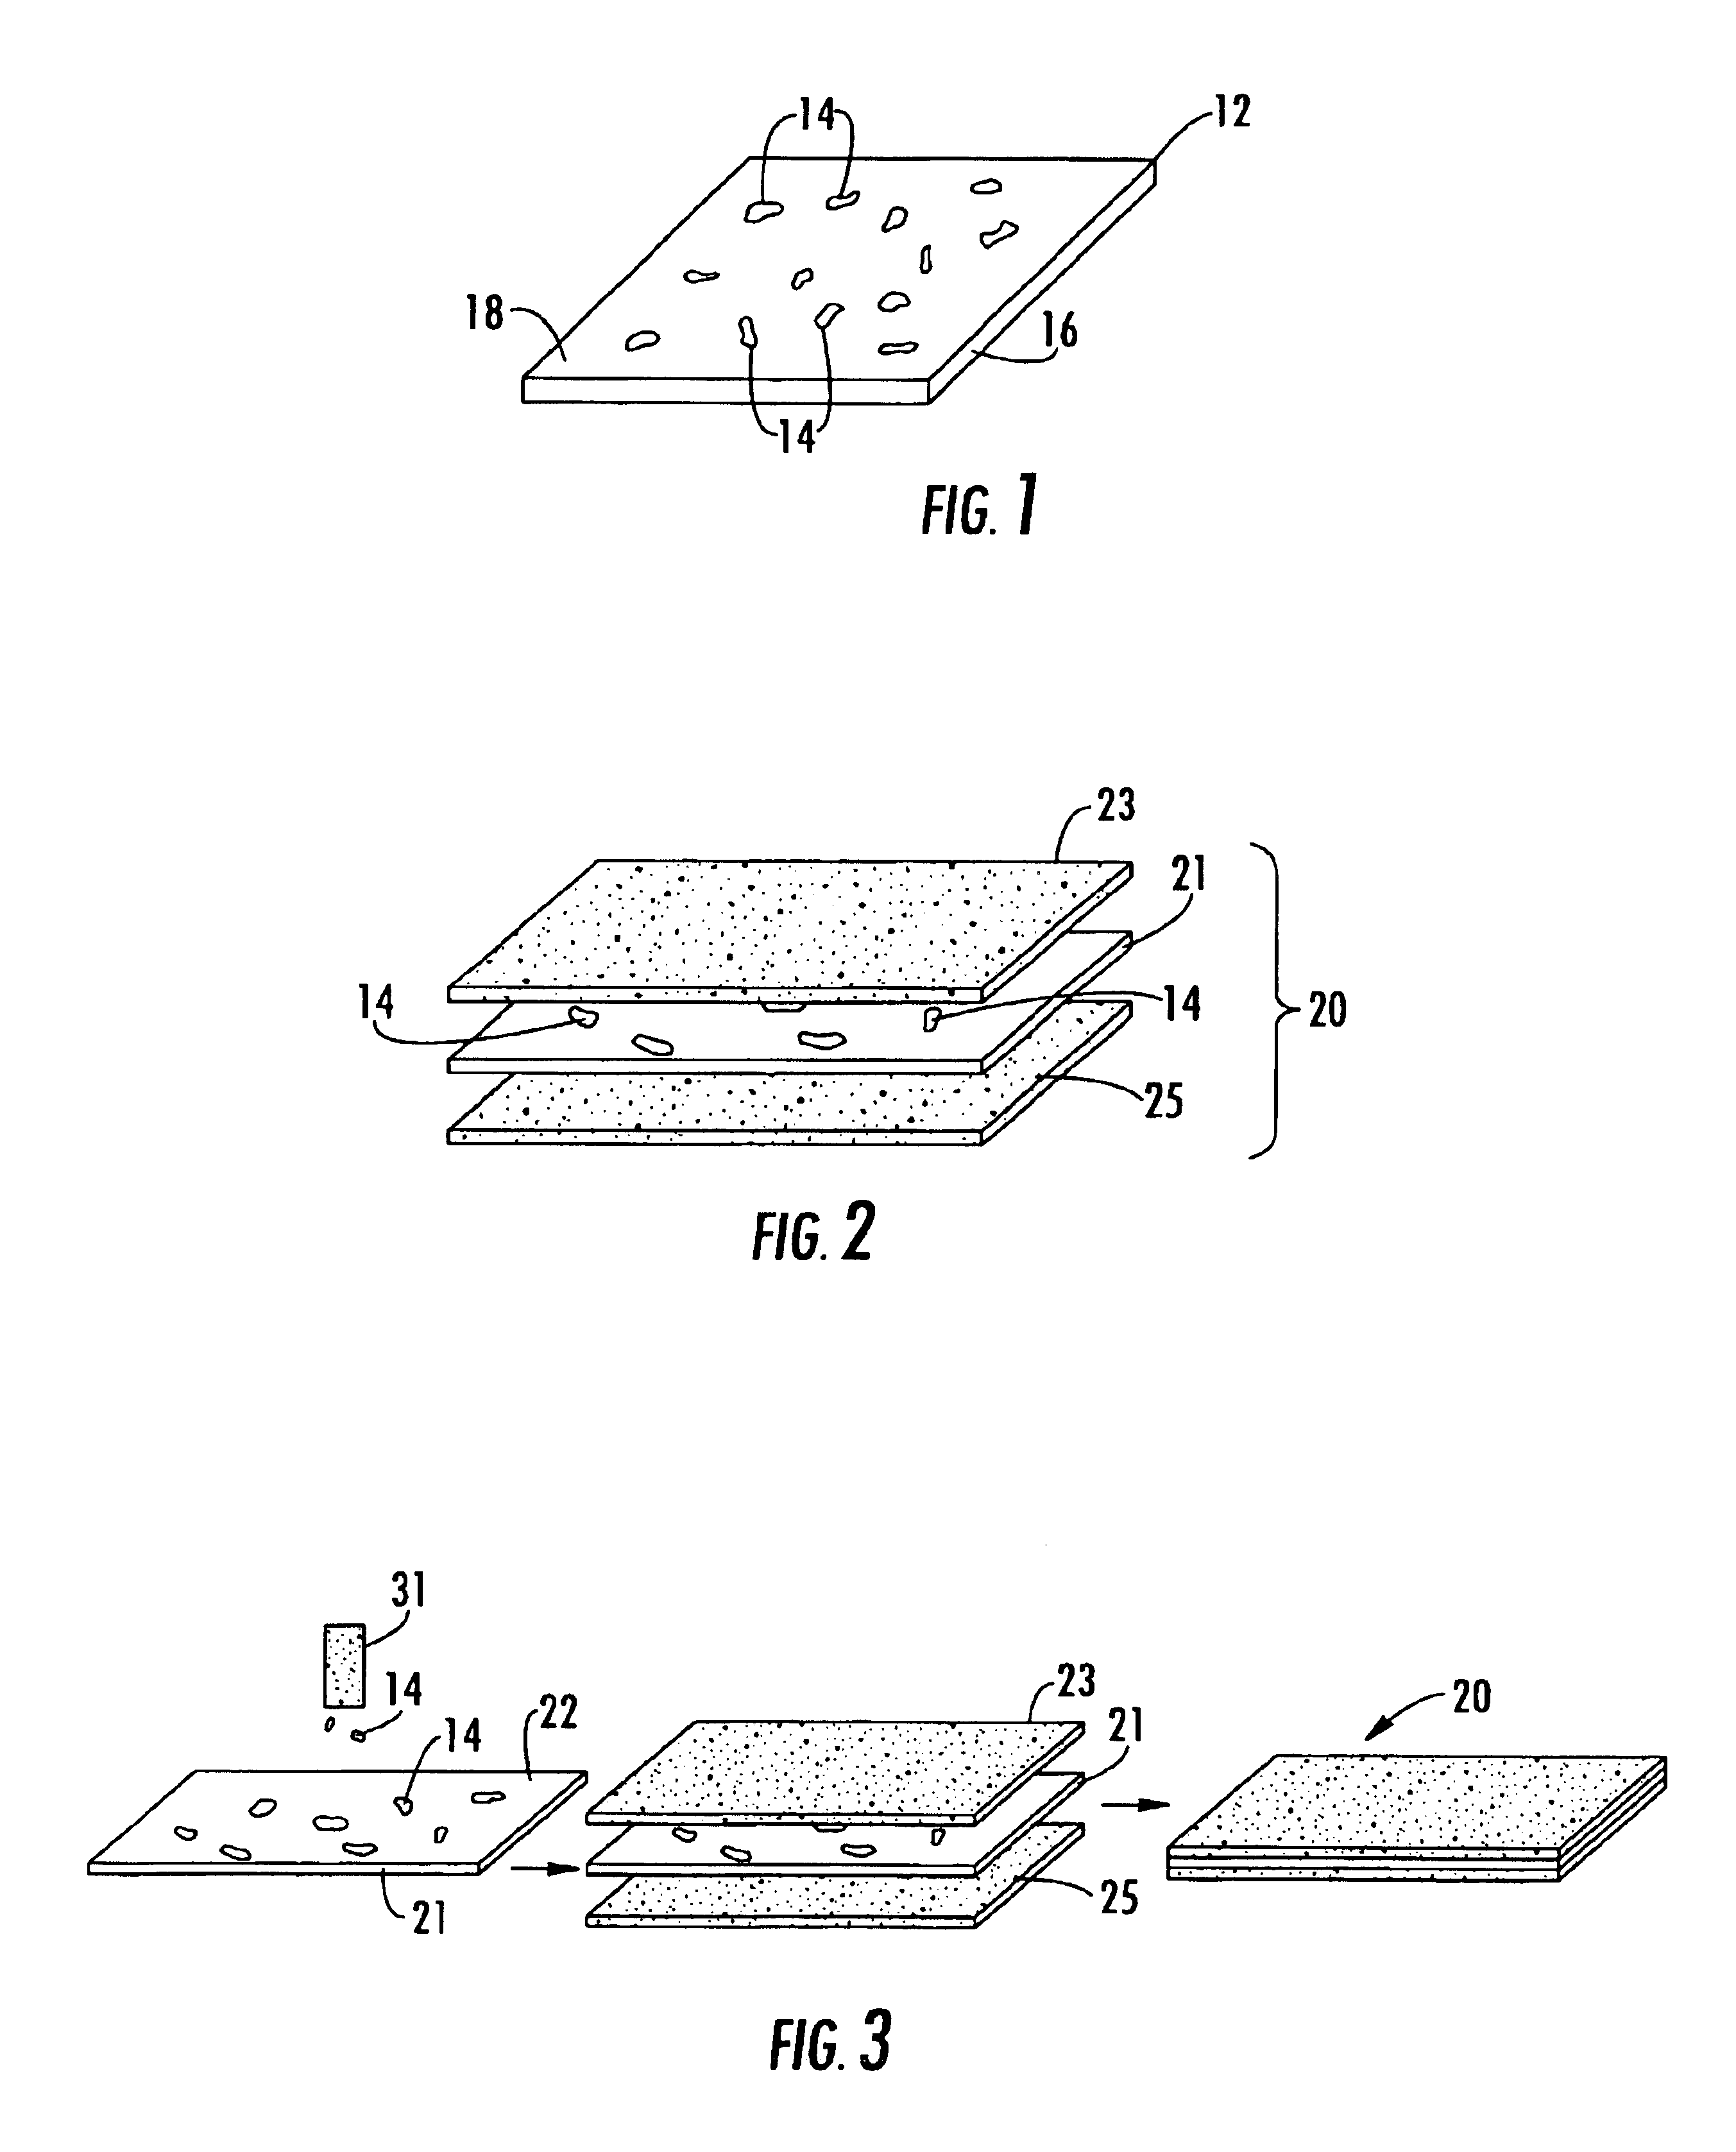 Substrate/document authentication using randomly dispersed dielectric components